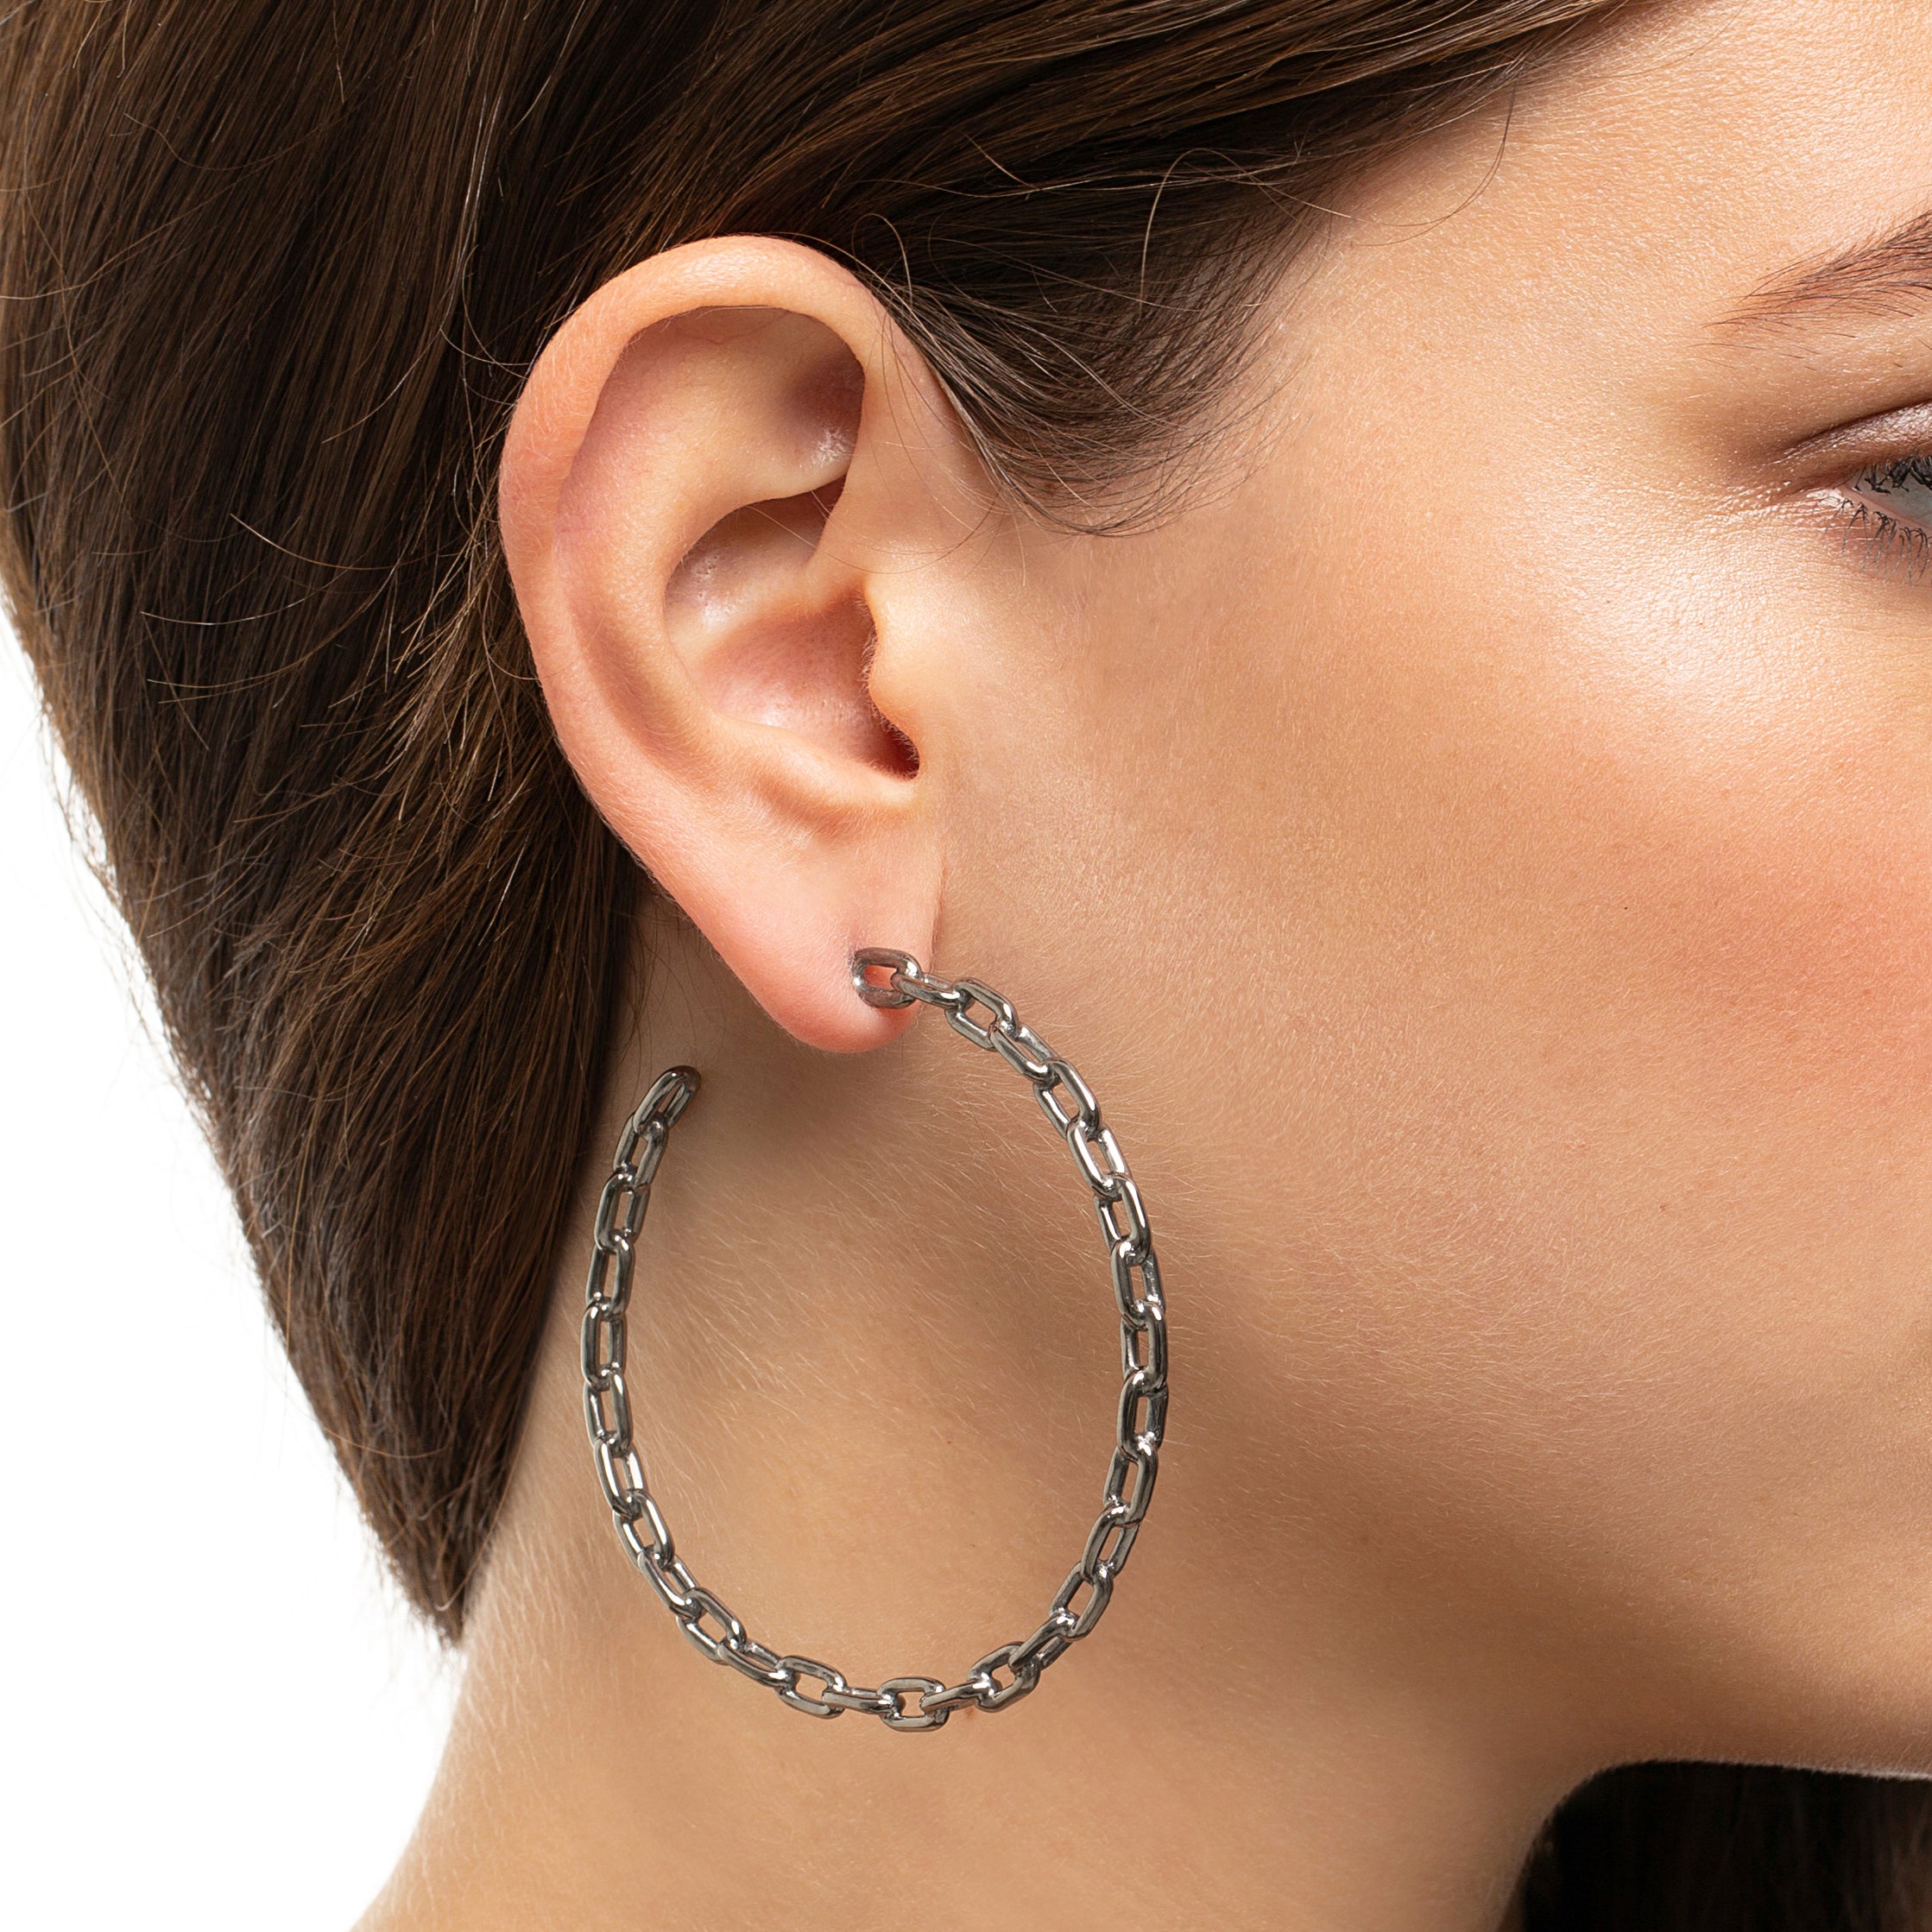 LARGE CHAIN HOOP EARRING IN BLACK RHODIUM PLATED SILVER